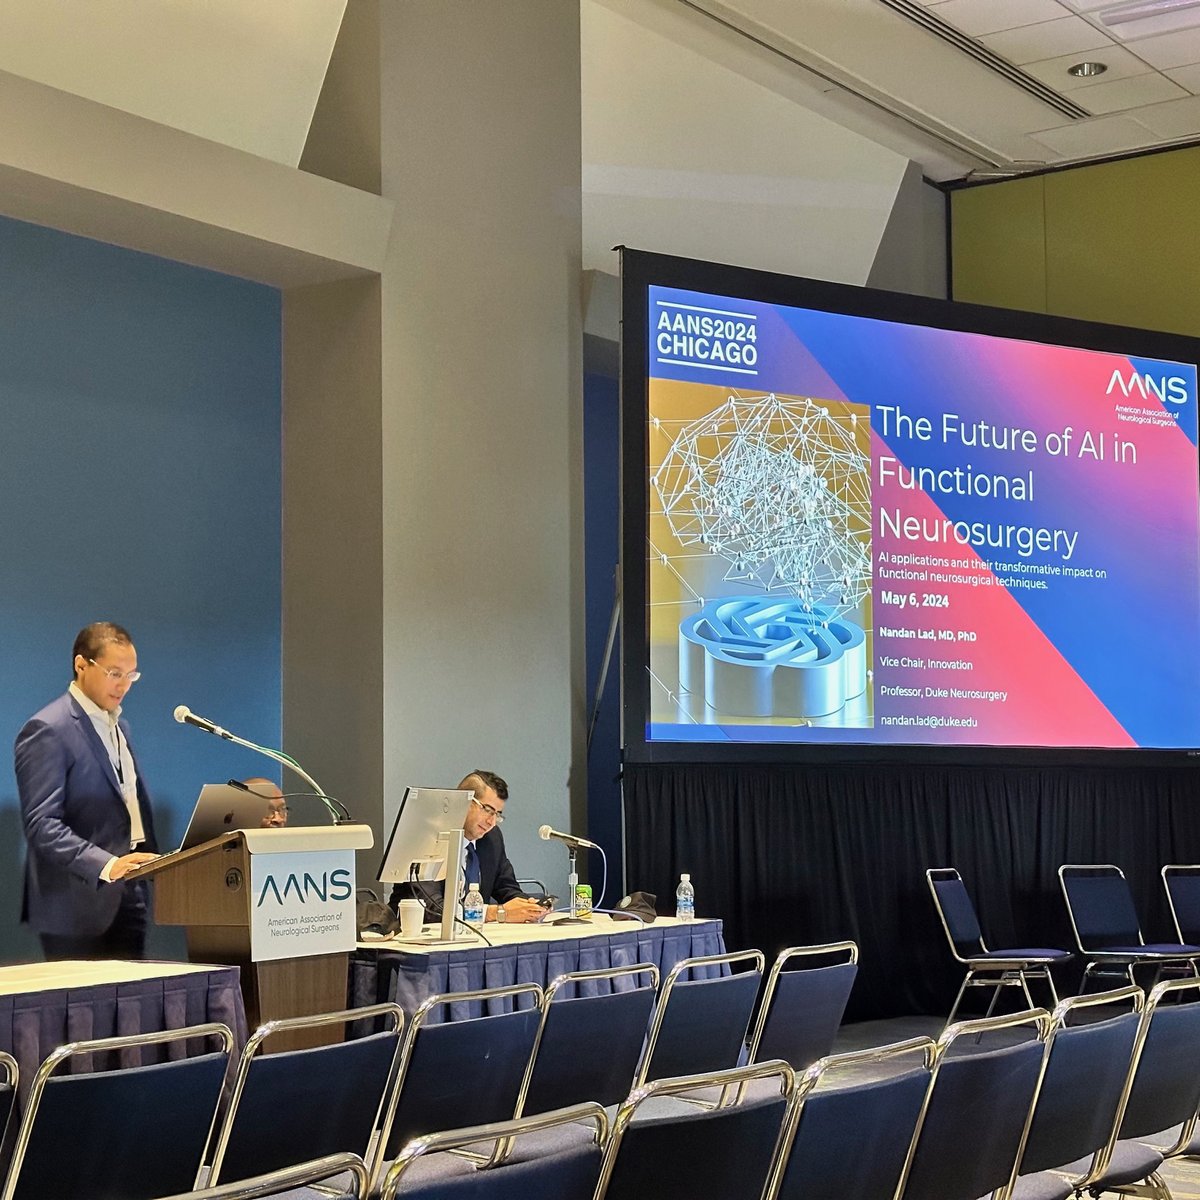 Here's Nandan Lad (@LadNeurosurgery) discussing the future of #AI in #functionalneurosurgery at #AANS2024. #DukeatAANS